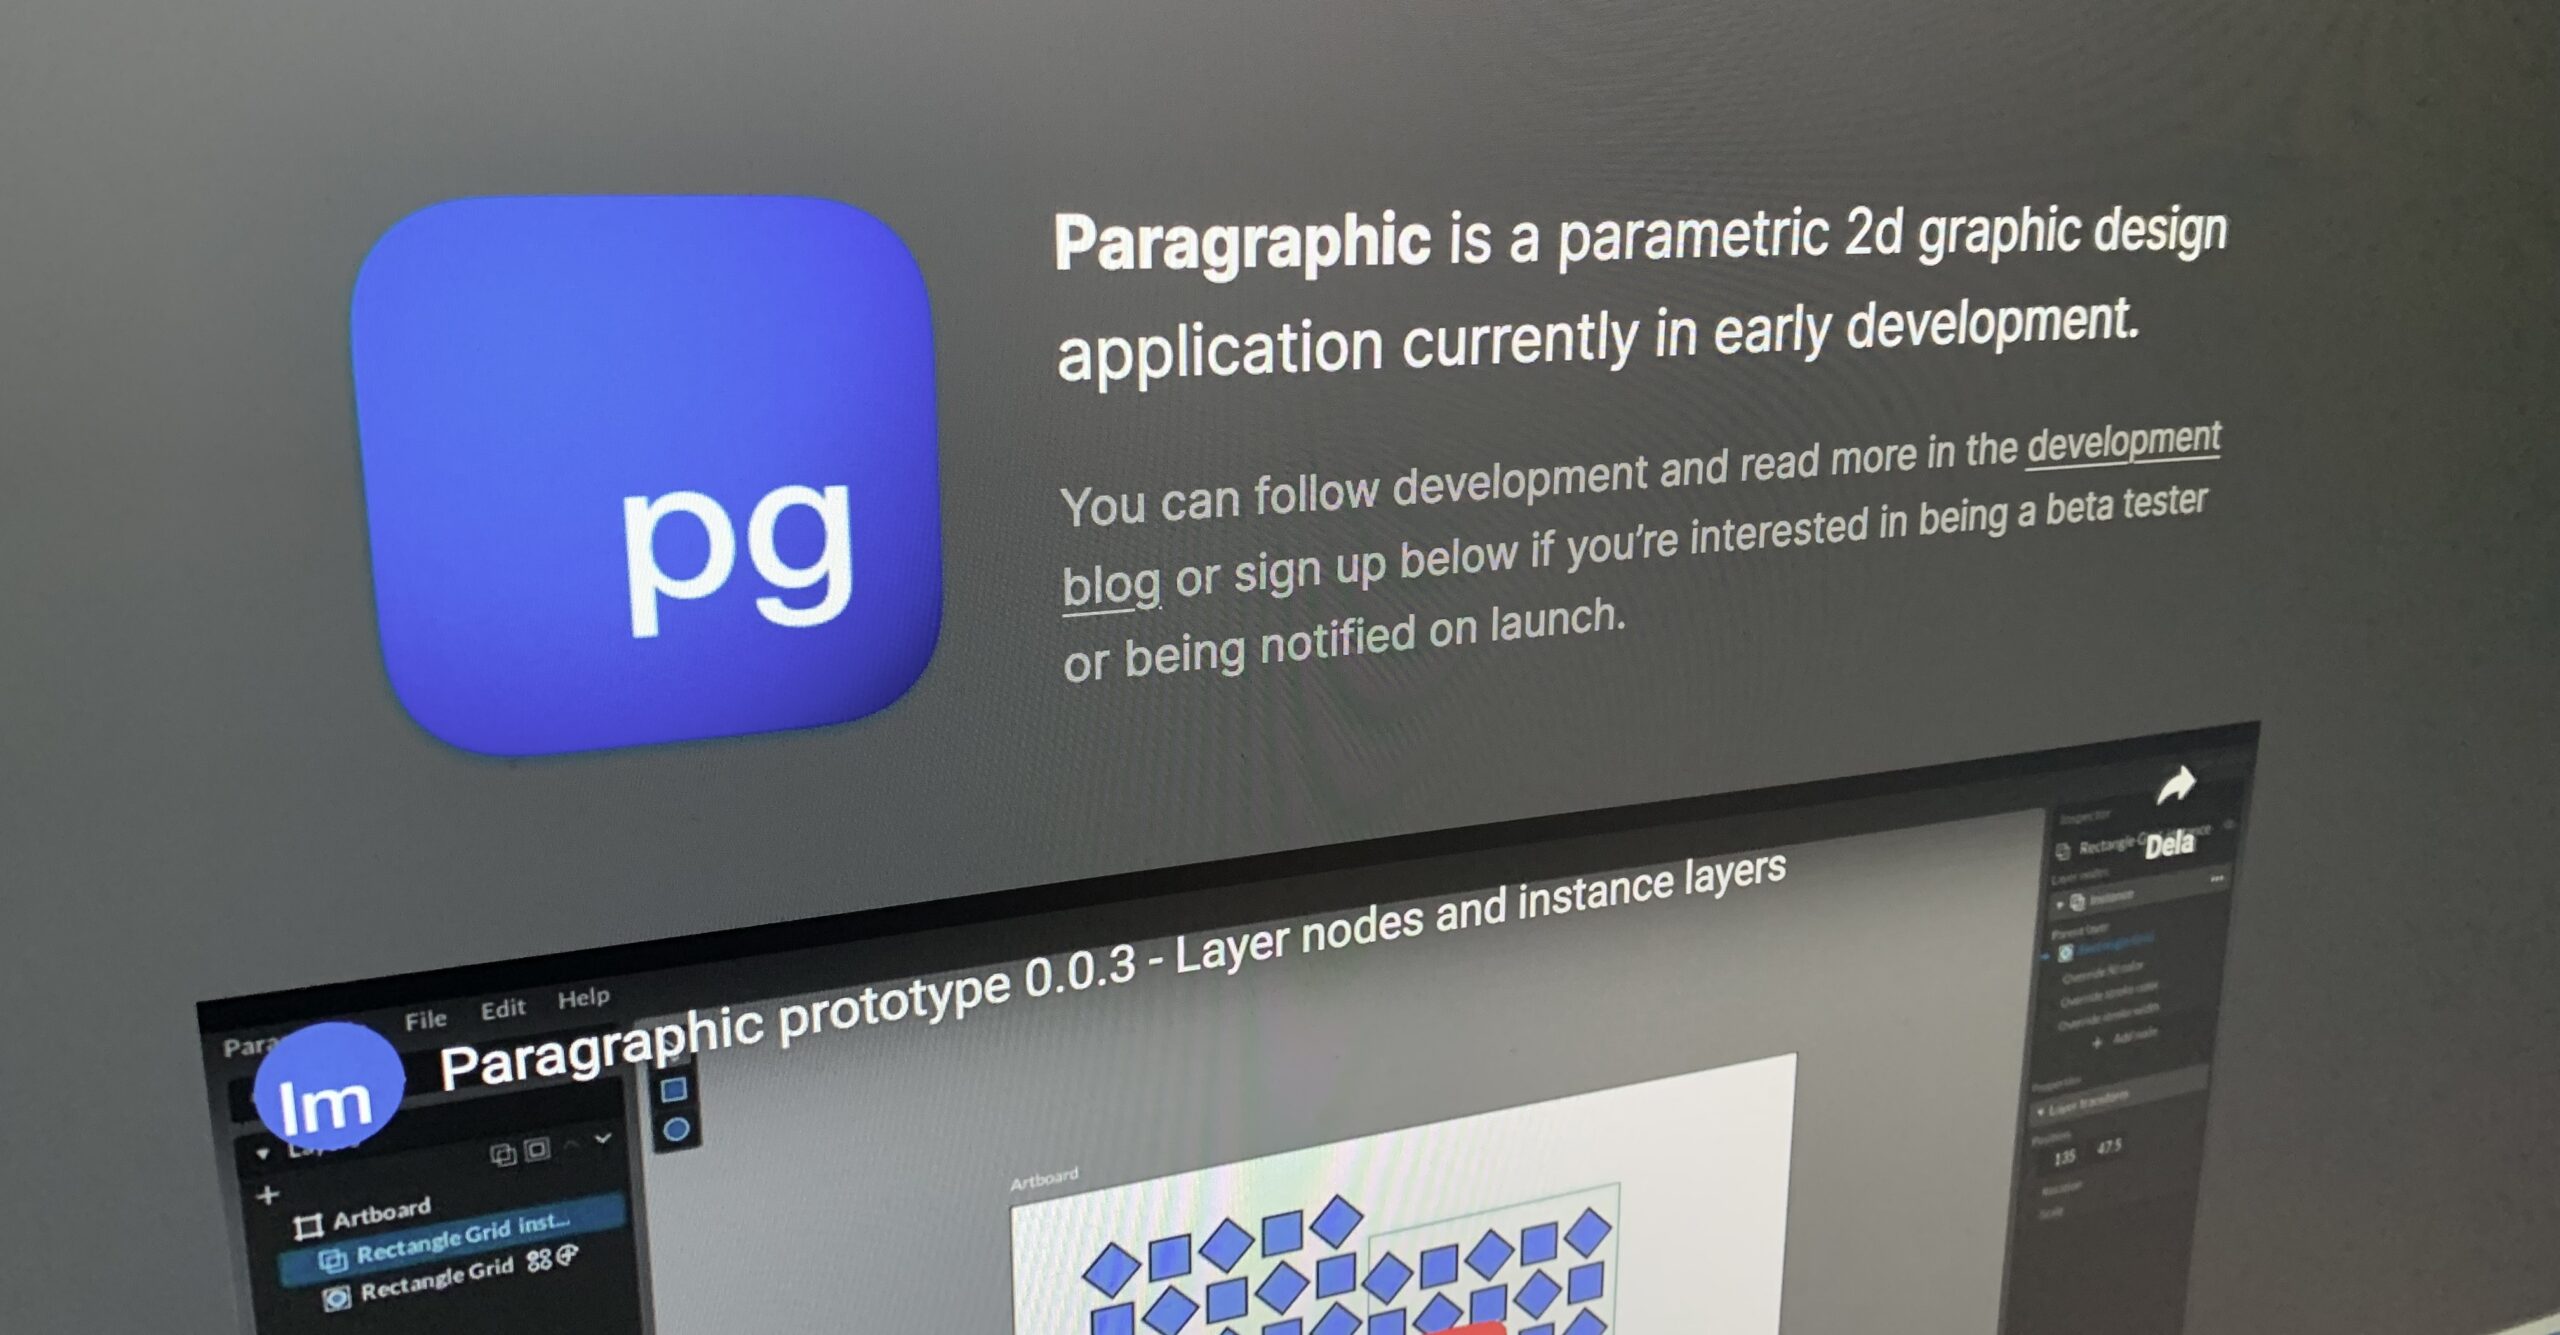 Paragraphic website launched